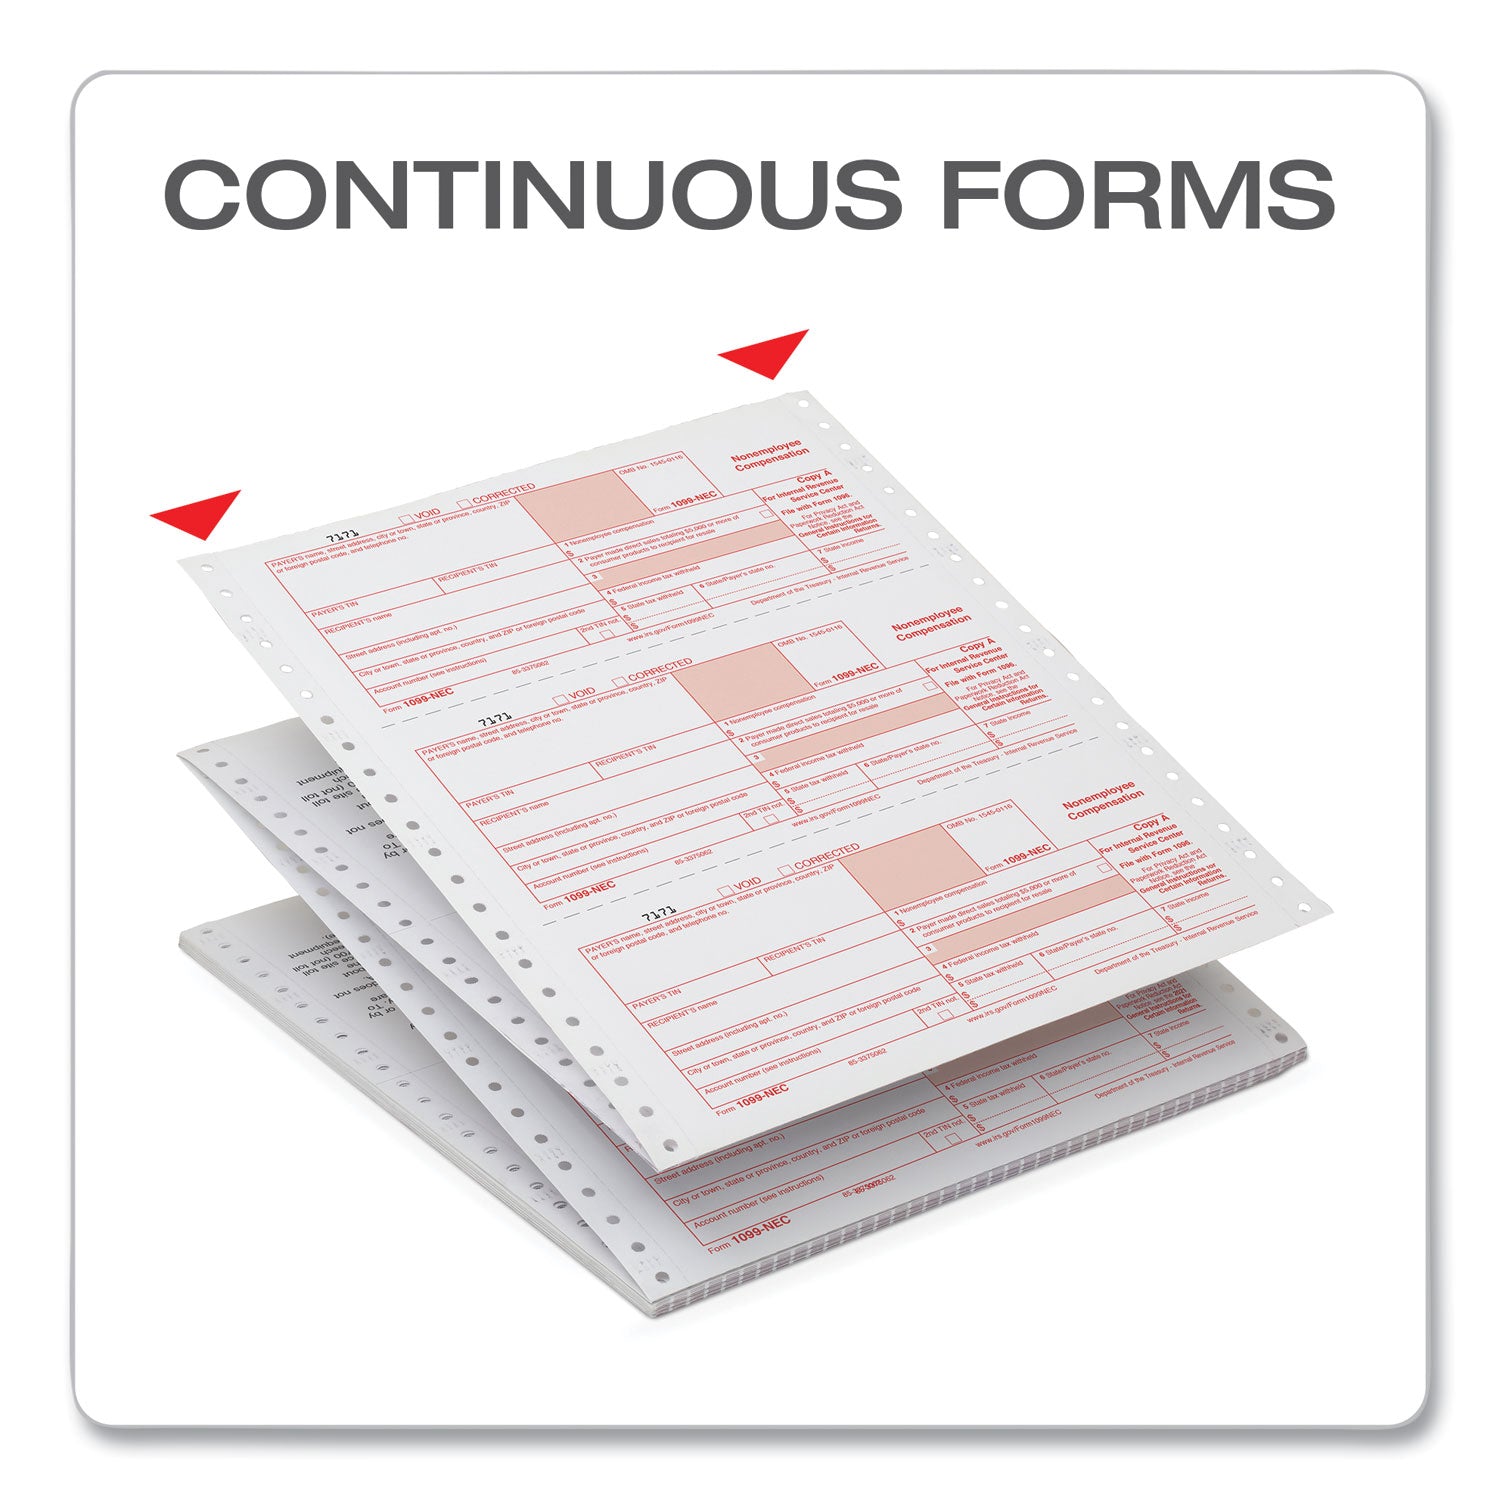 1099-nec-continuous-tax-forms-fiscal-year-2023-four-part-carbonless-85-x-55-2-forms-sheet-24-forms-total_top2299nec - 5